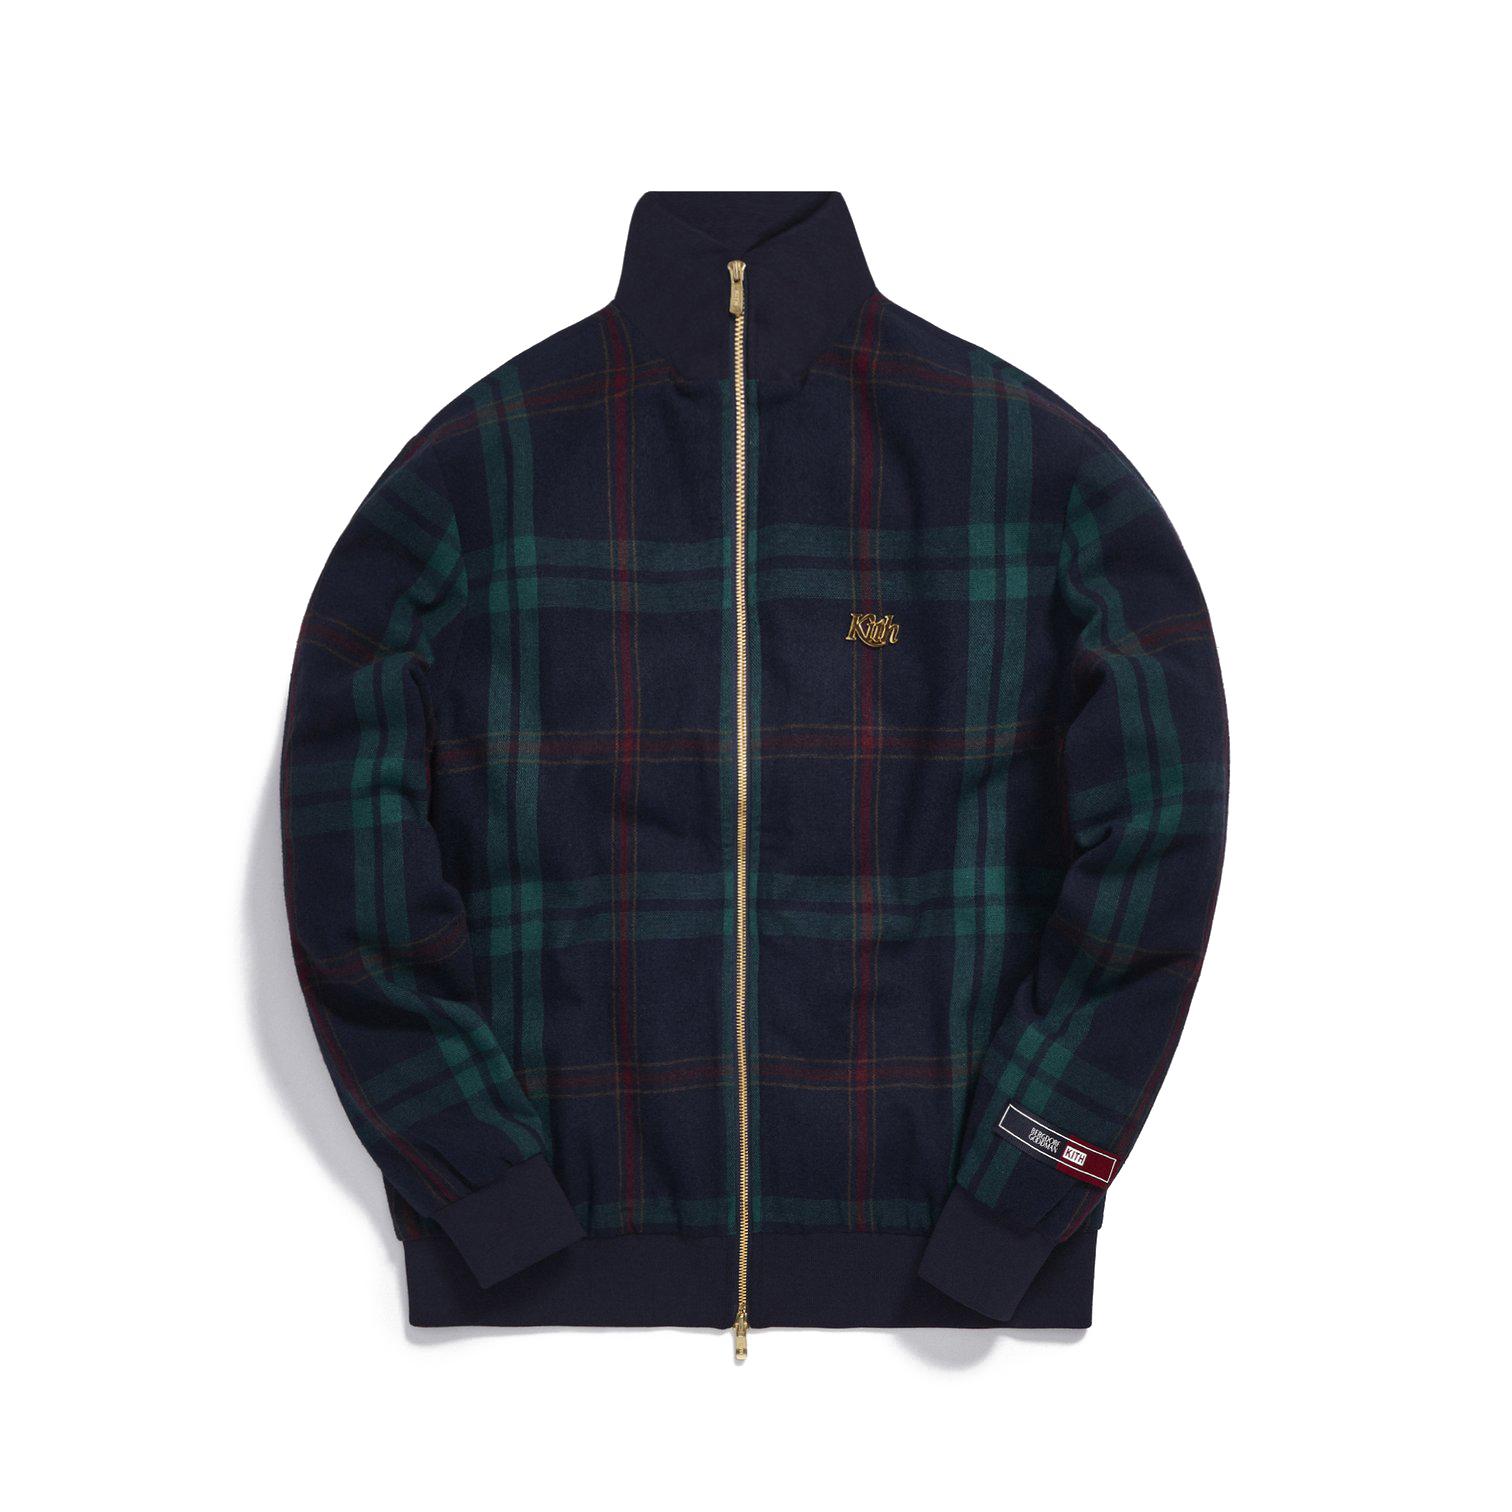 Kith for Bergdorf Goodman Lewis Track Jacket Navy/Green Plaid 